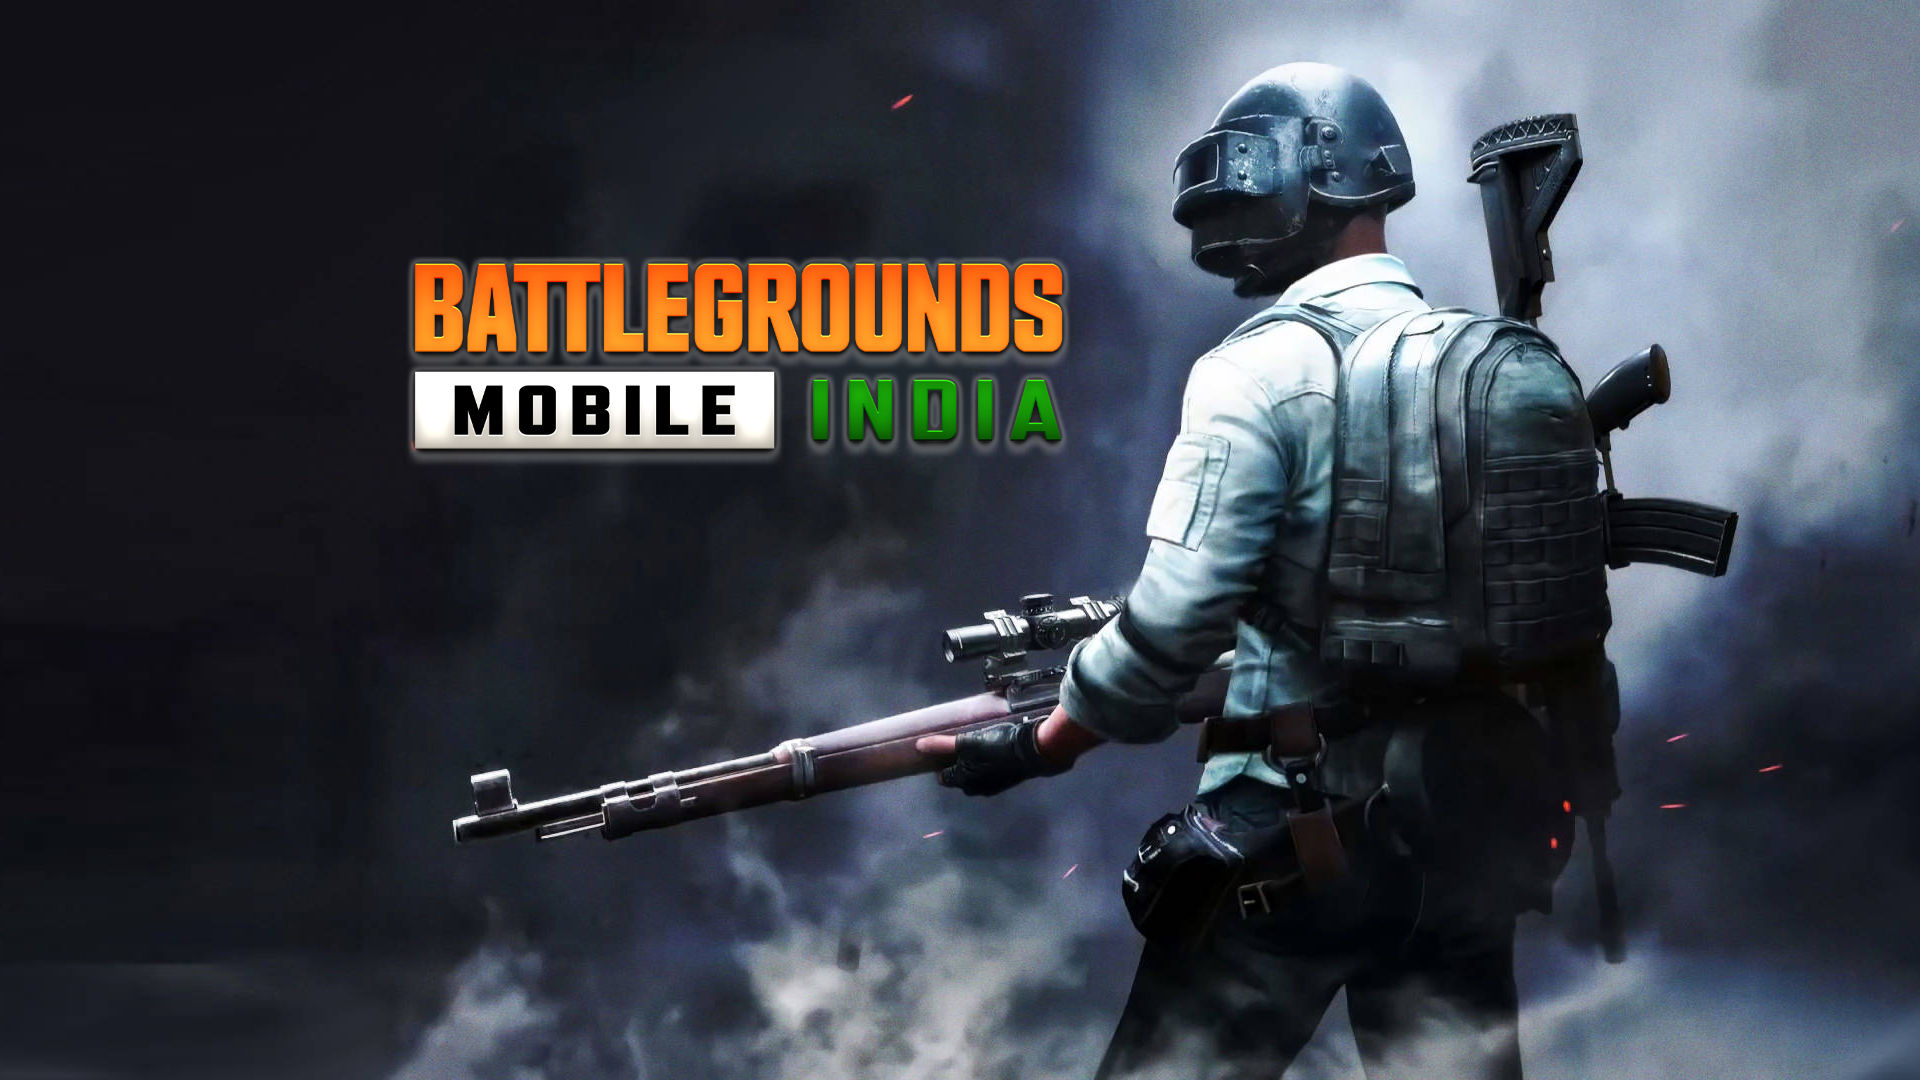 Krafton Battlegrounds Mobile India BGMI Permanently Banned 336736 Accounts For Cheating in Seven Days